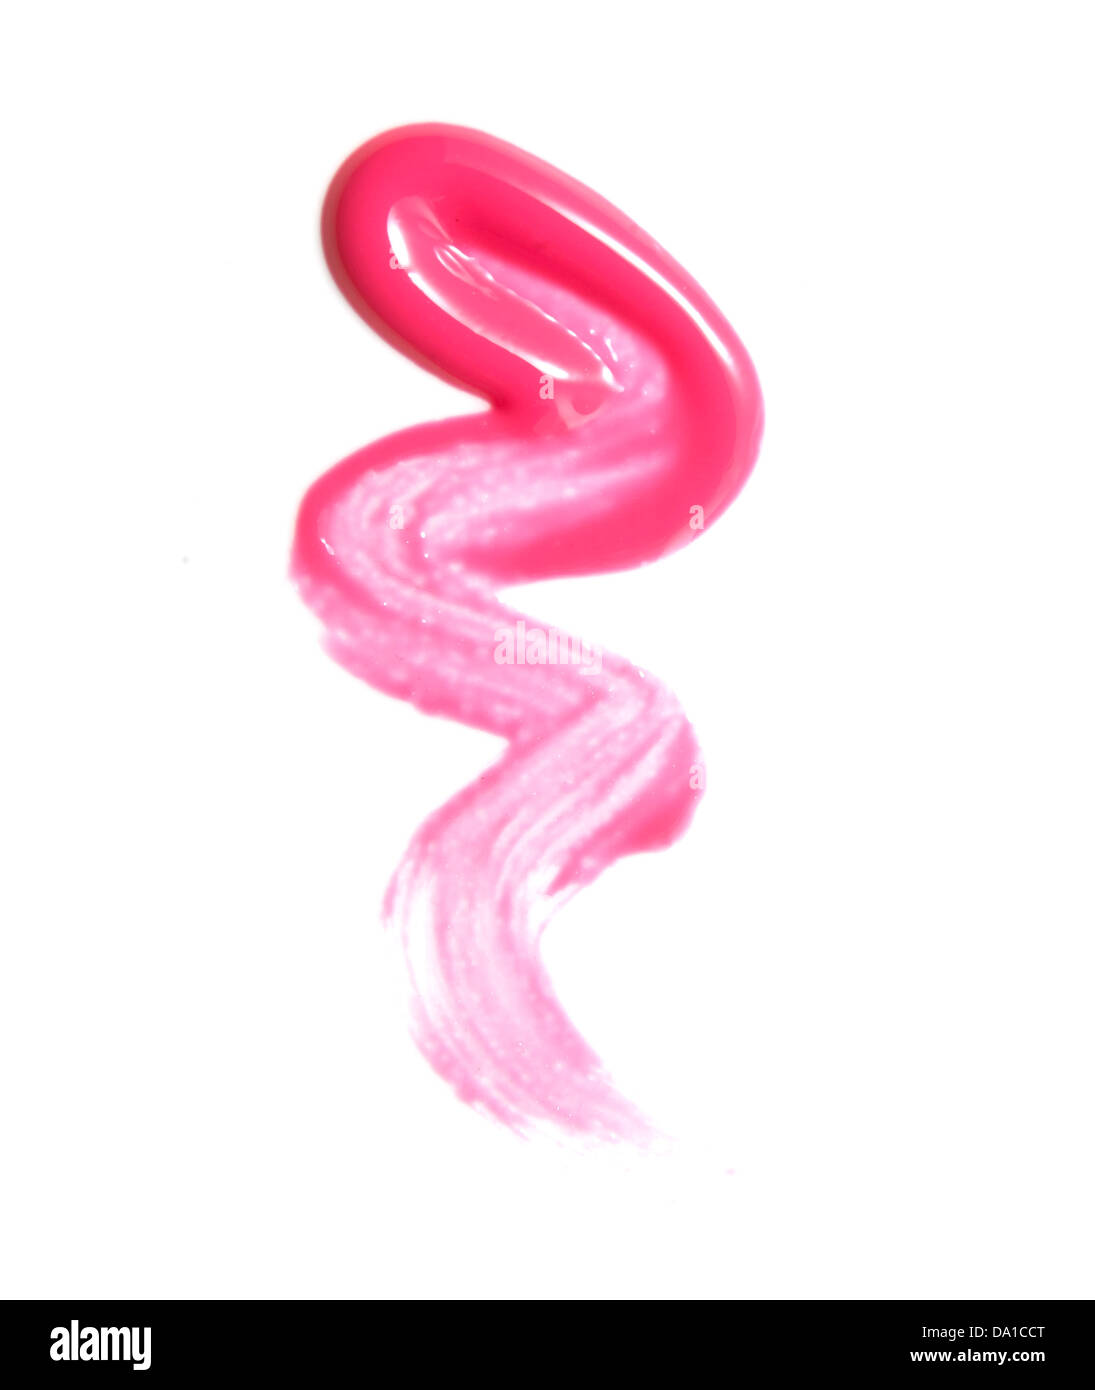 red lip gloss squiggle cut out onto a white background Stock Photo